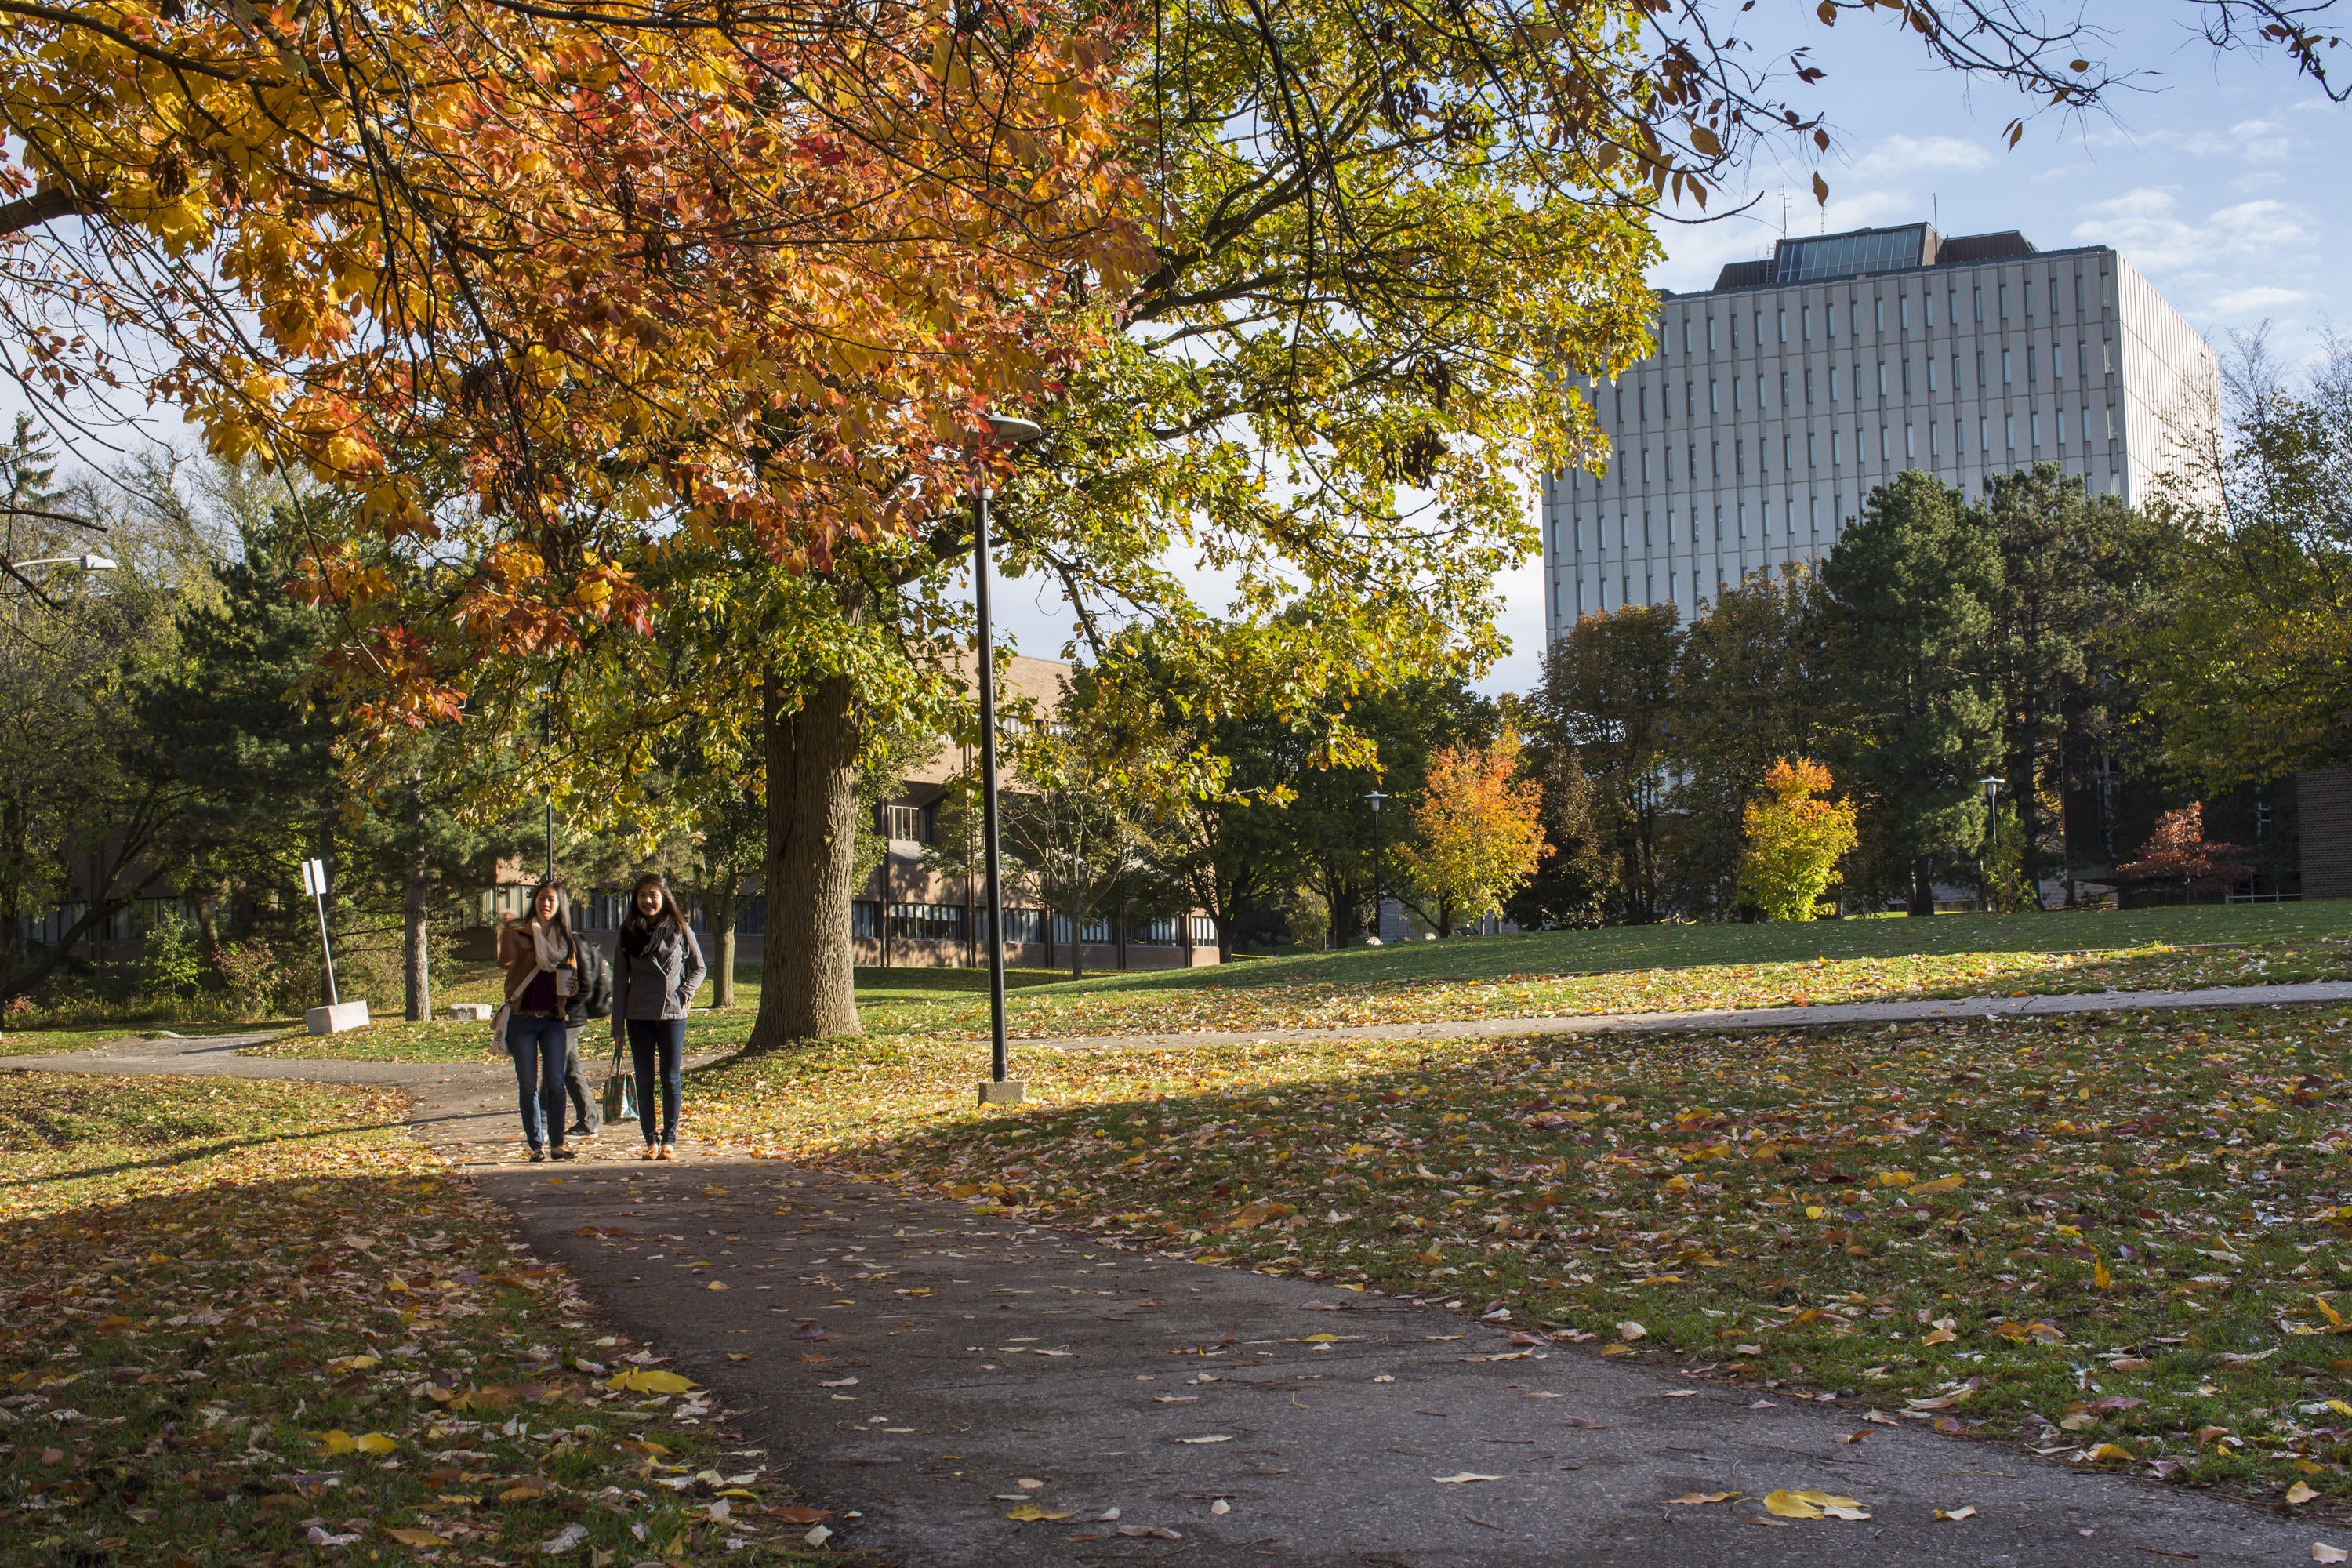 Two students walking together on campus during autumn 